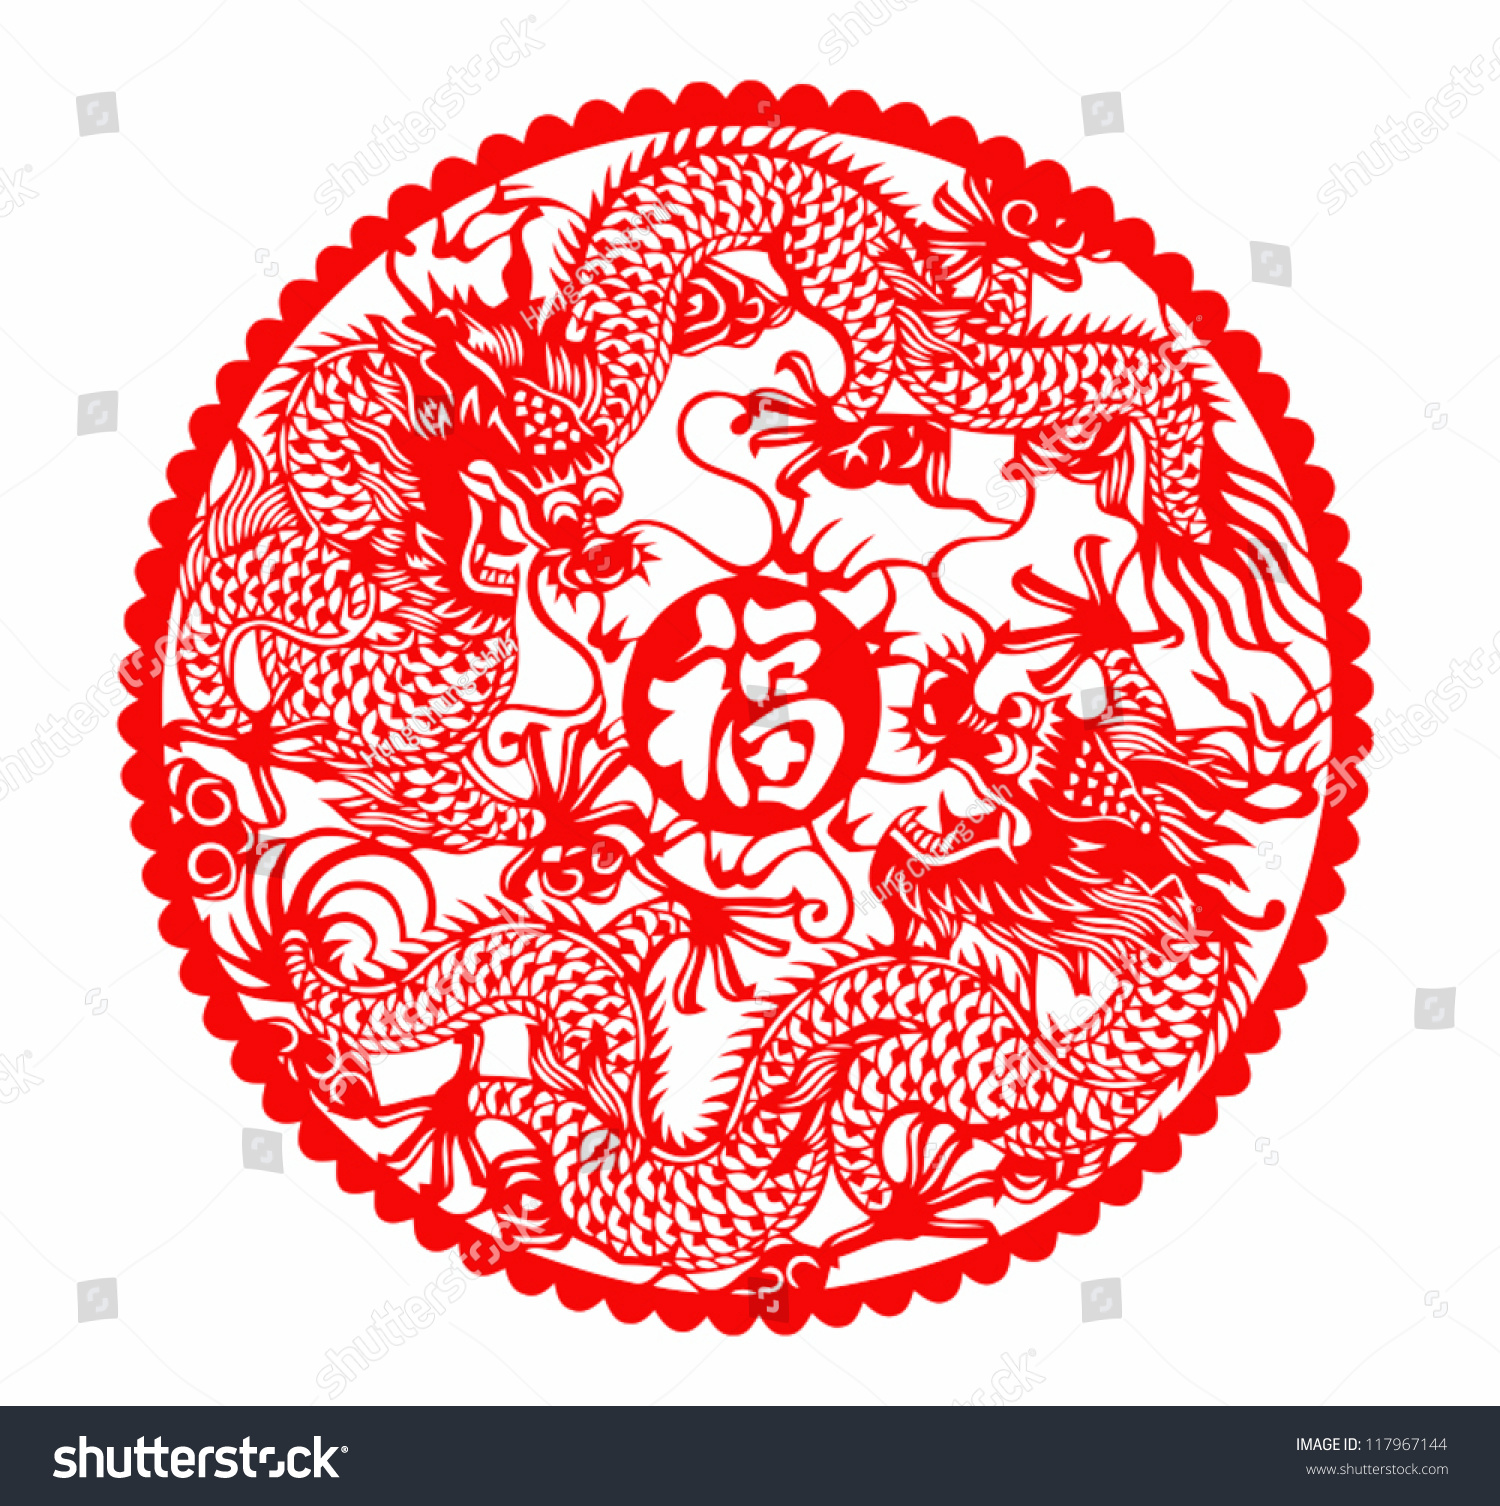 stock vector happy chinese new year symbols double dragons and chinese character fu for fortune happiness 117967144